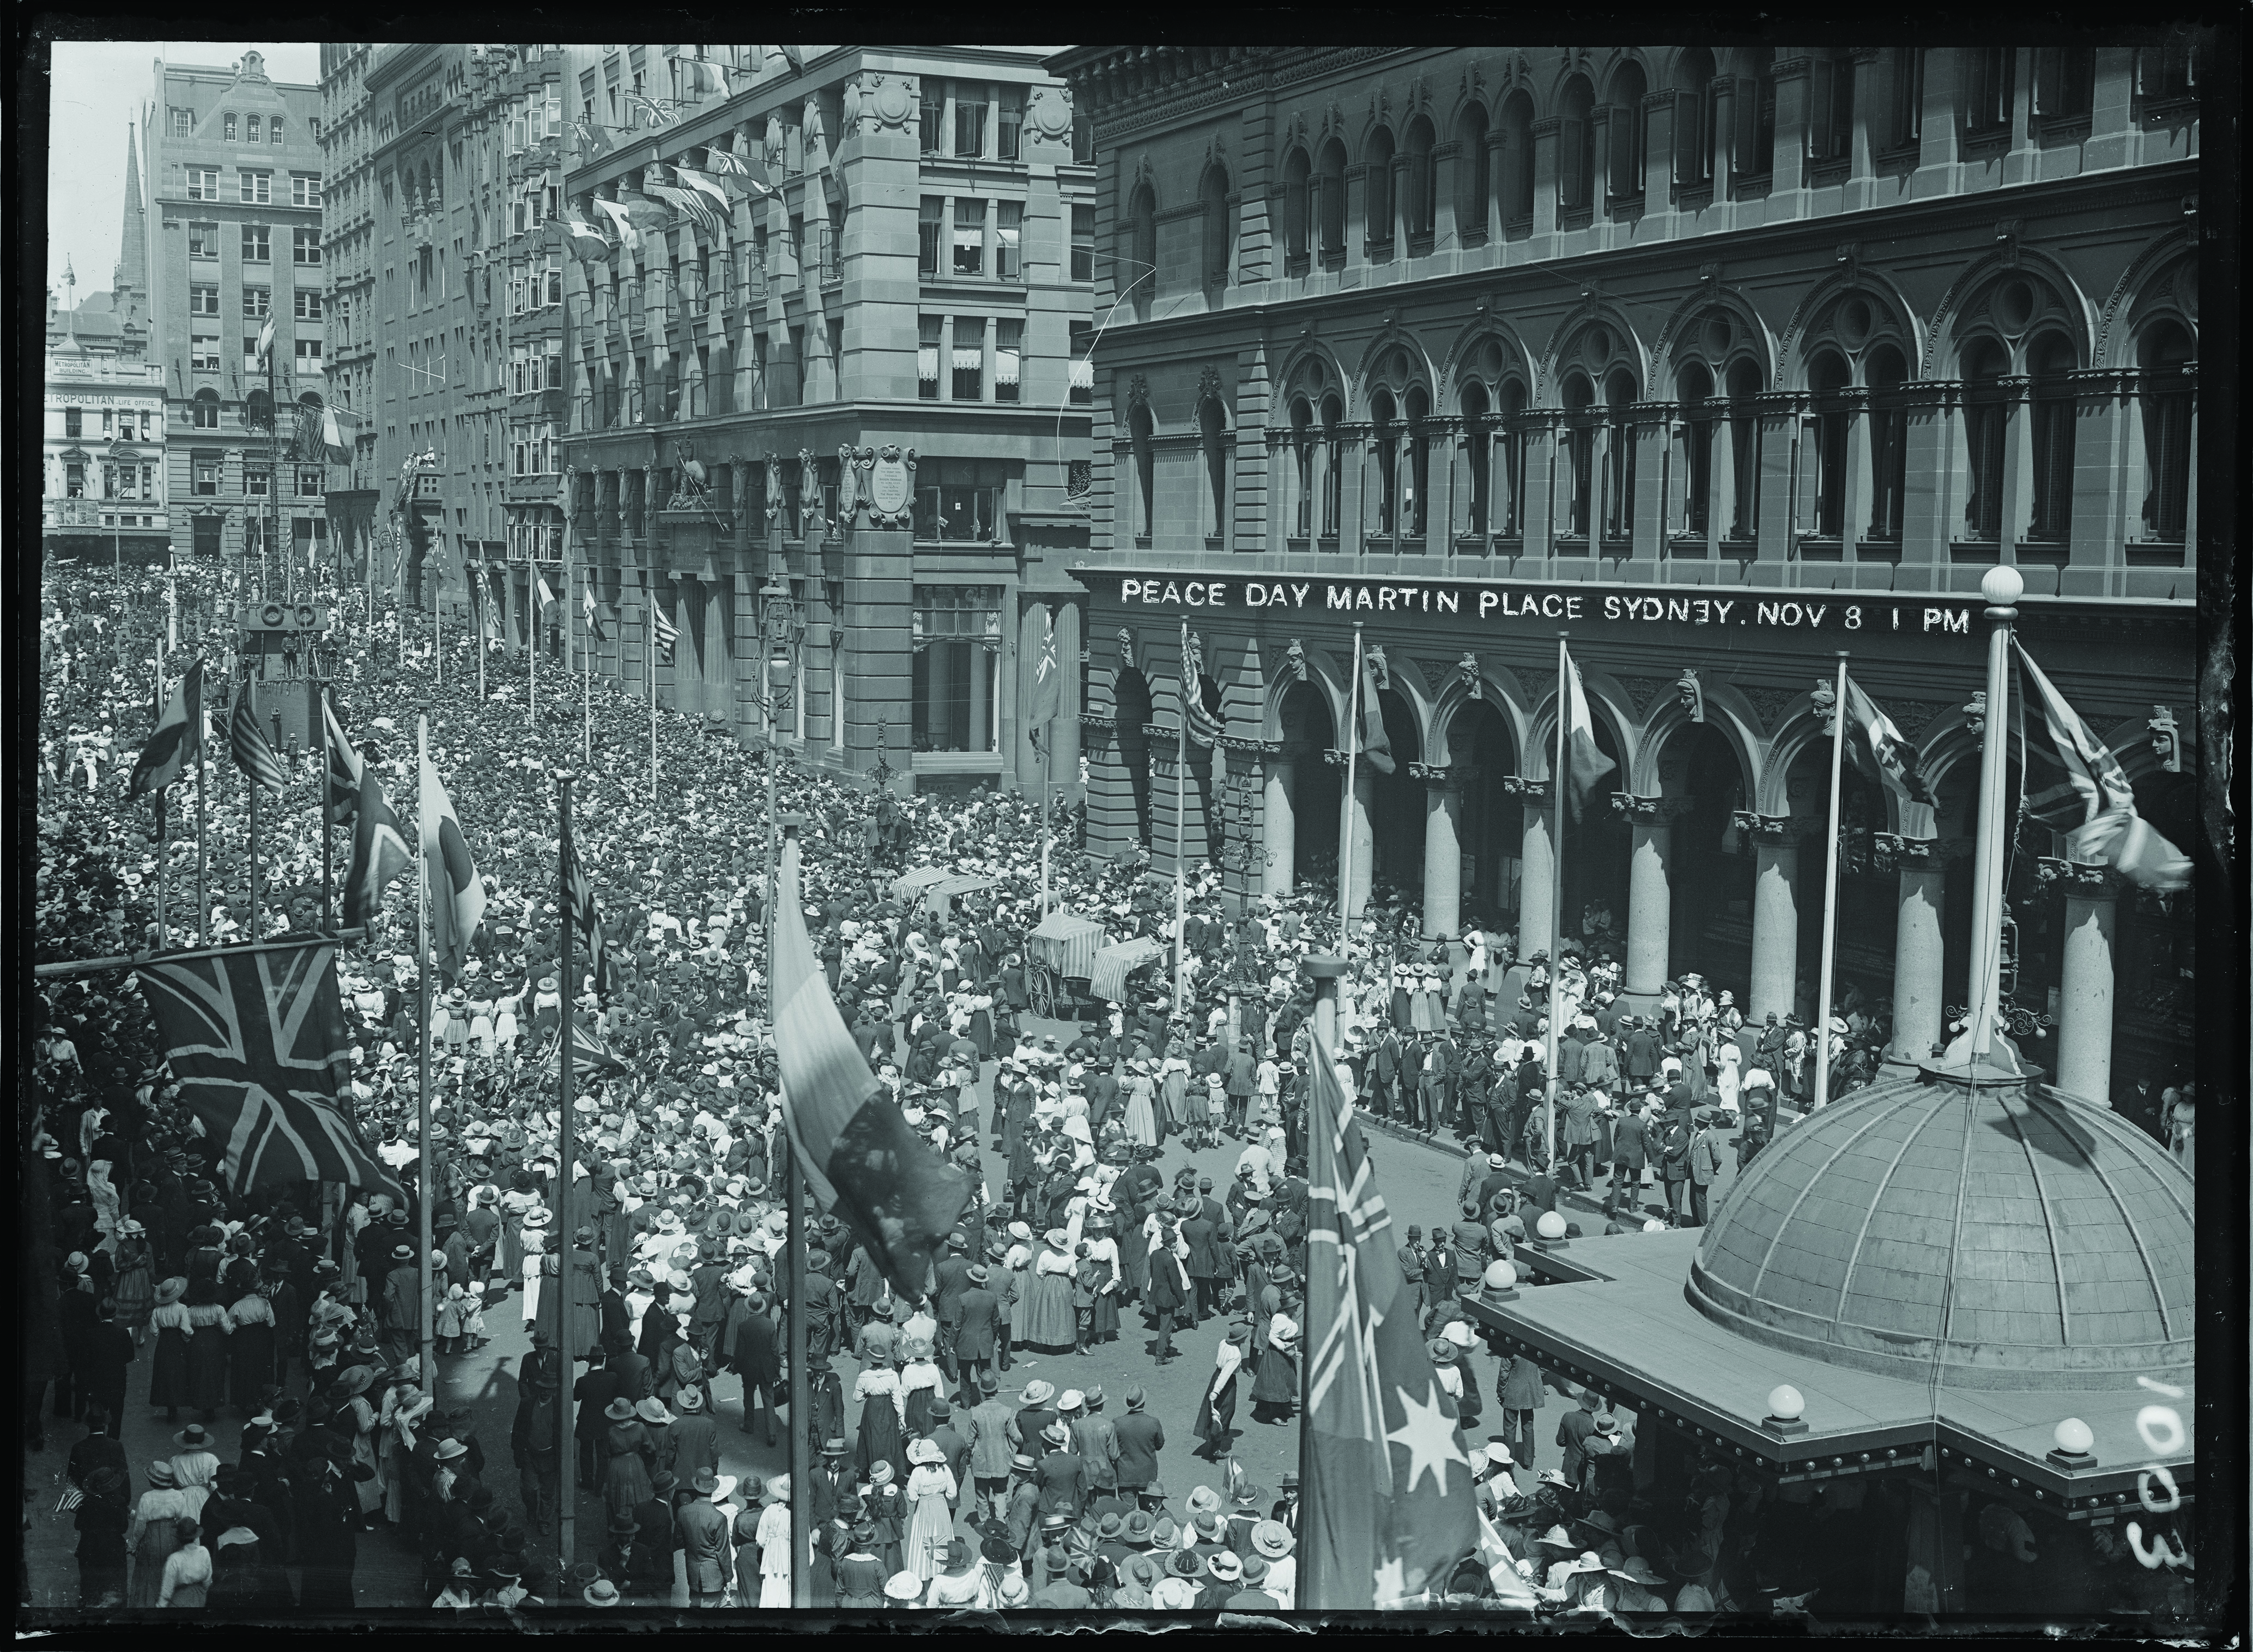 The Sun printed this photograph of a 'Carnival of Peace' where thousands gathered in Martin Place. Allies' flags hang from poles edging the public space